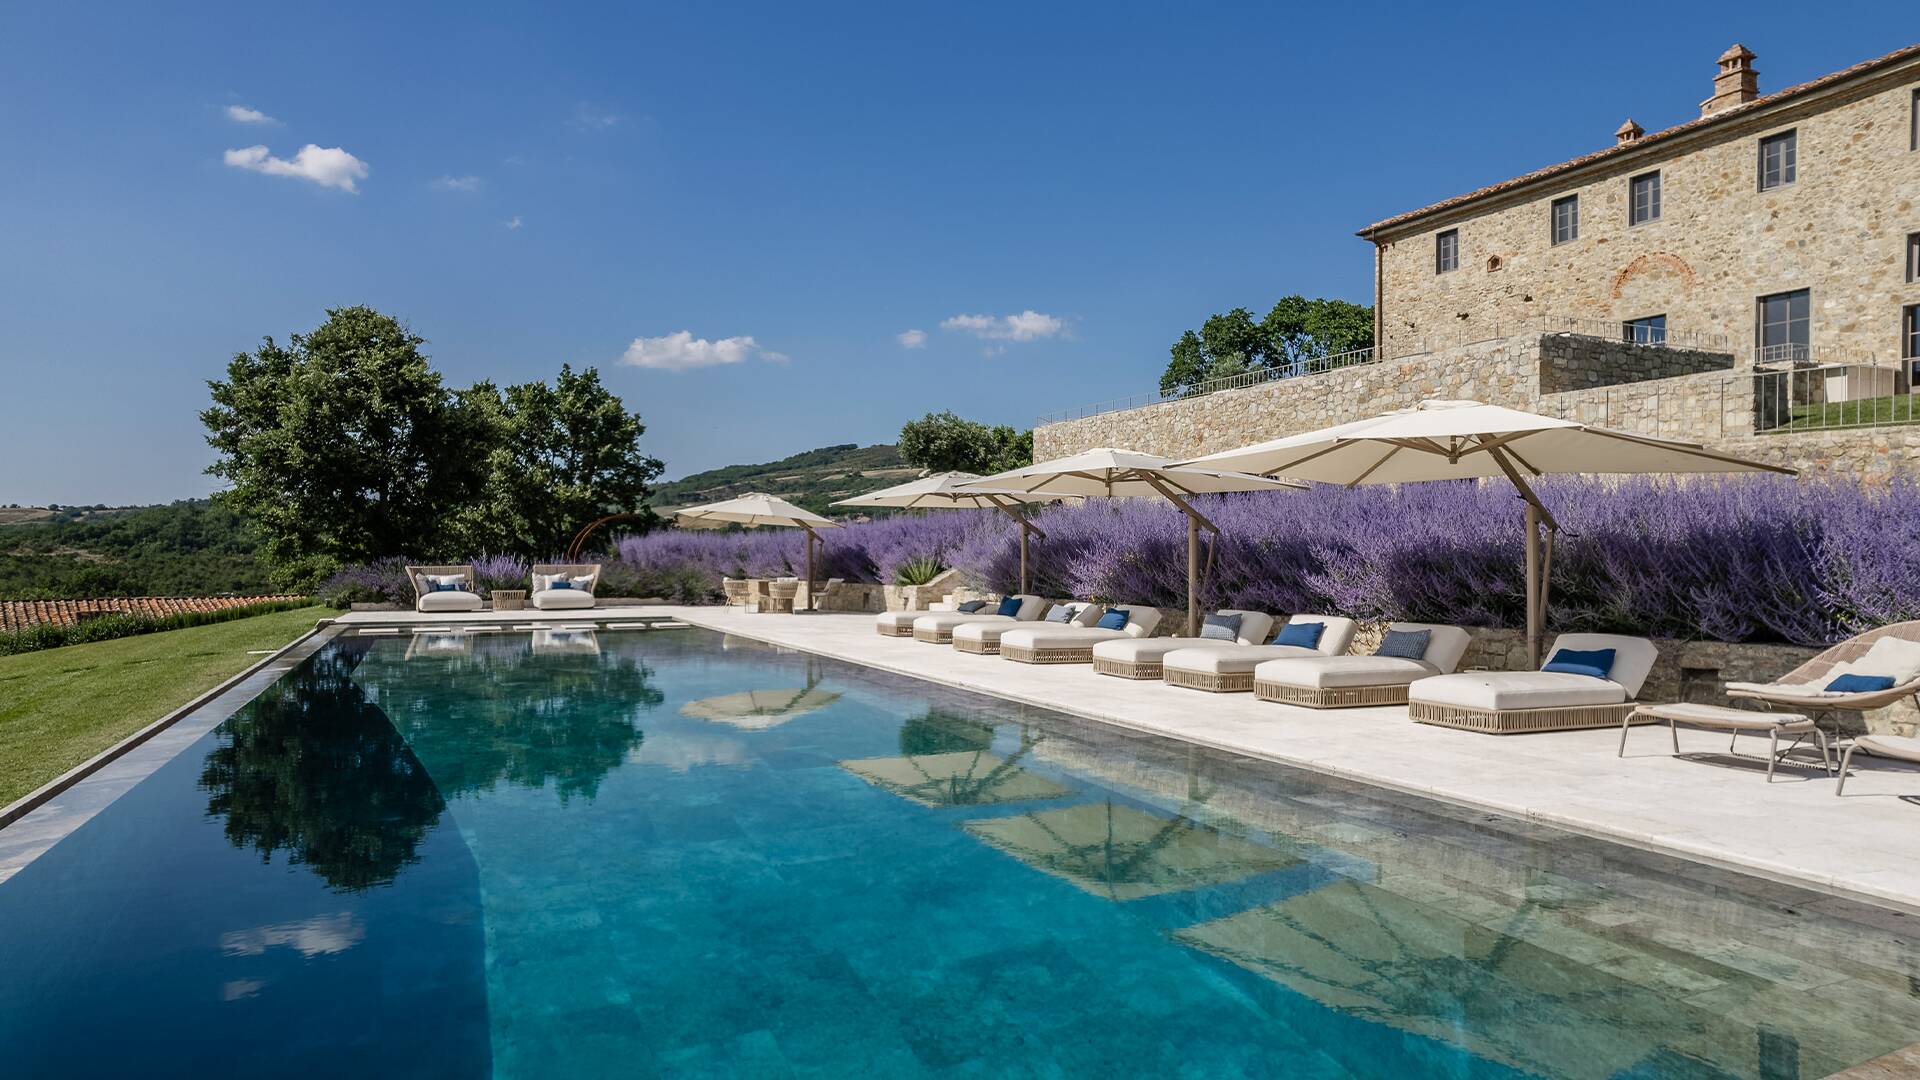 majestic pool with charming lavender in bloom